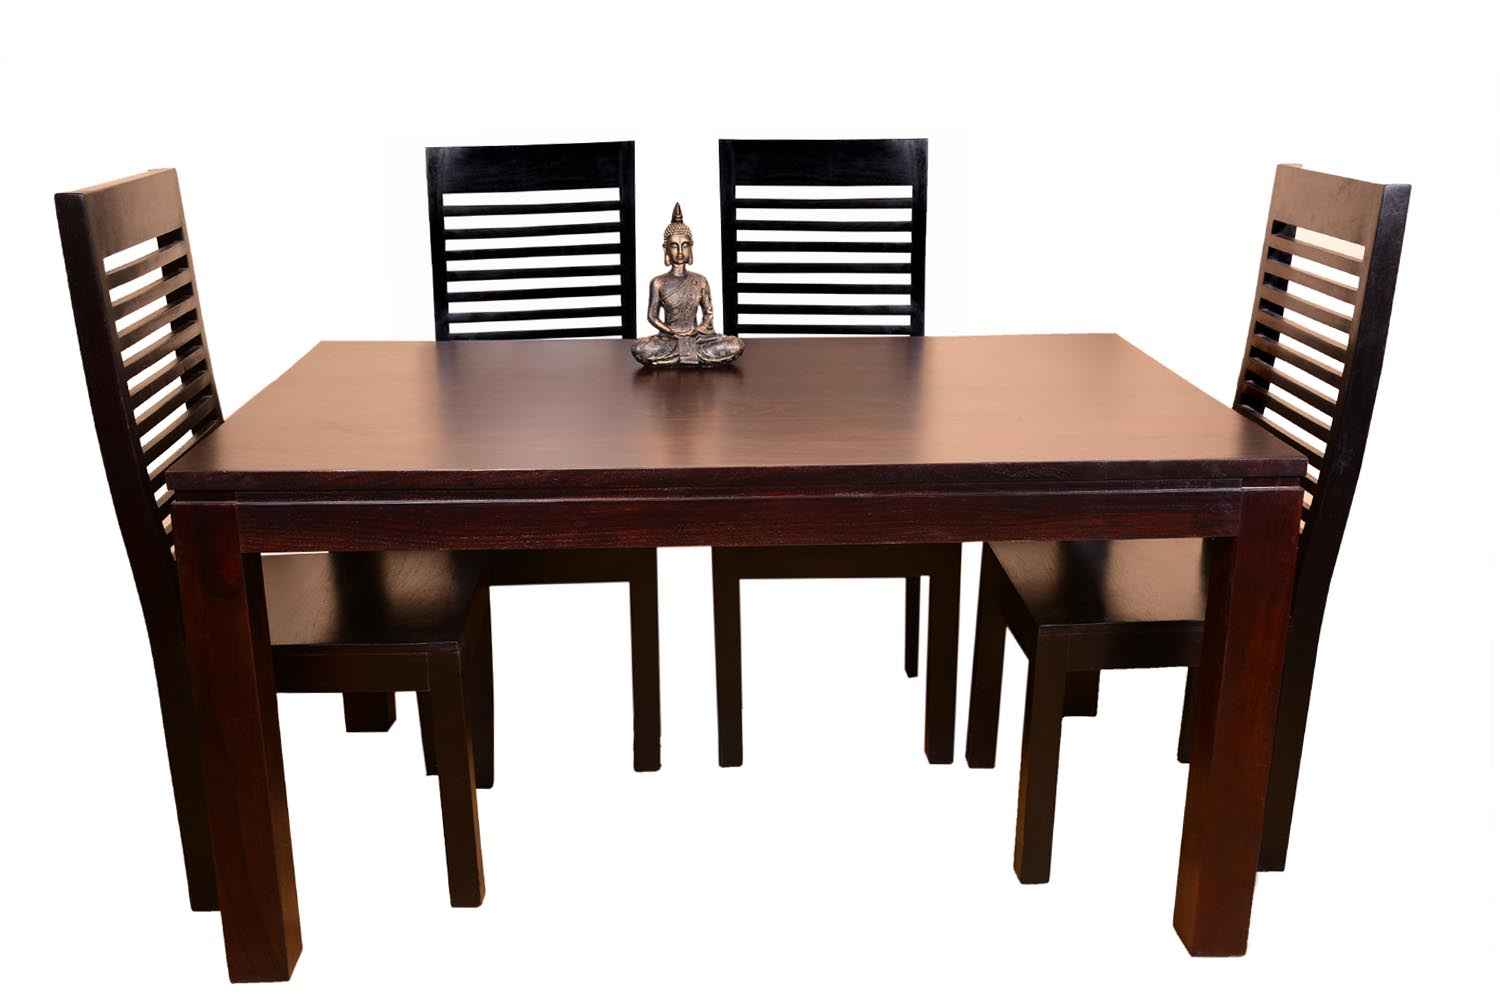 Buy 6 Seater Classic Dining Table Set Small size | Dining Room, 6 Seater Dining Table & Sets ...